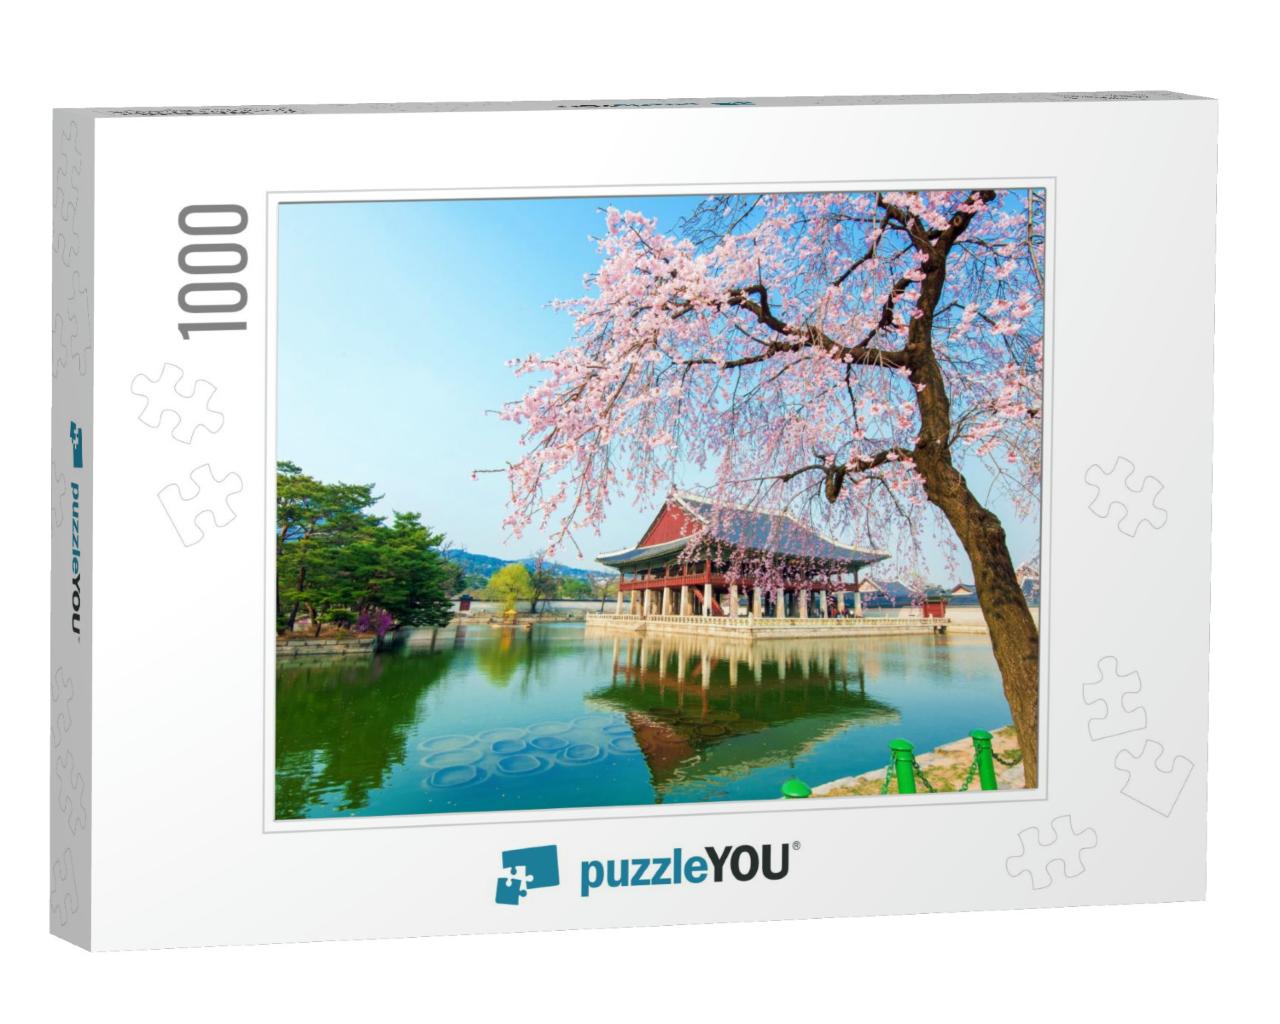 Gyeongbokgung Palace with Cherry Blossom in Spring, Korea... Jigsaw Puzzle with 1000 pieces